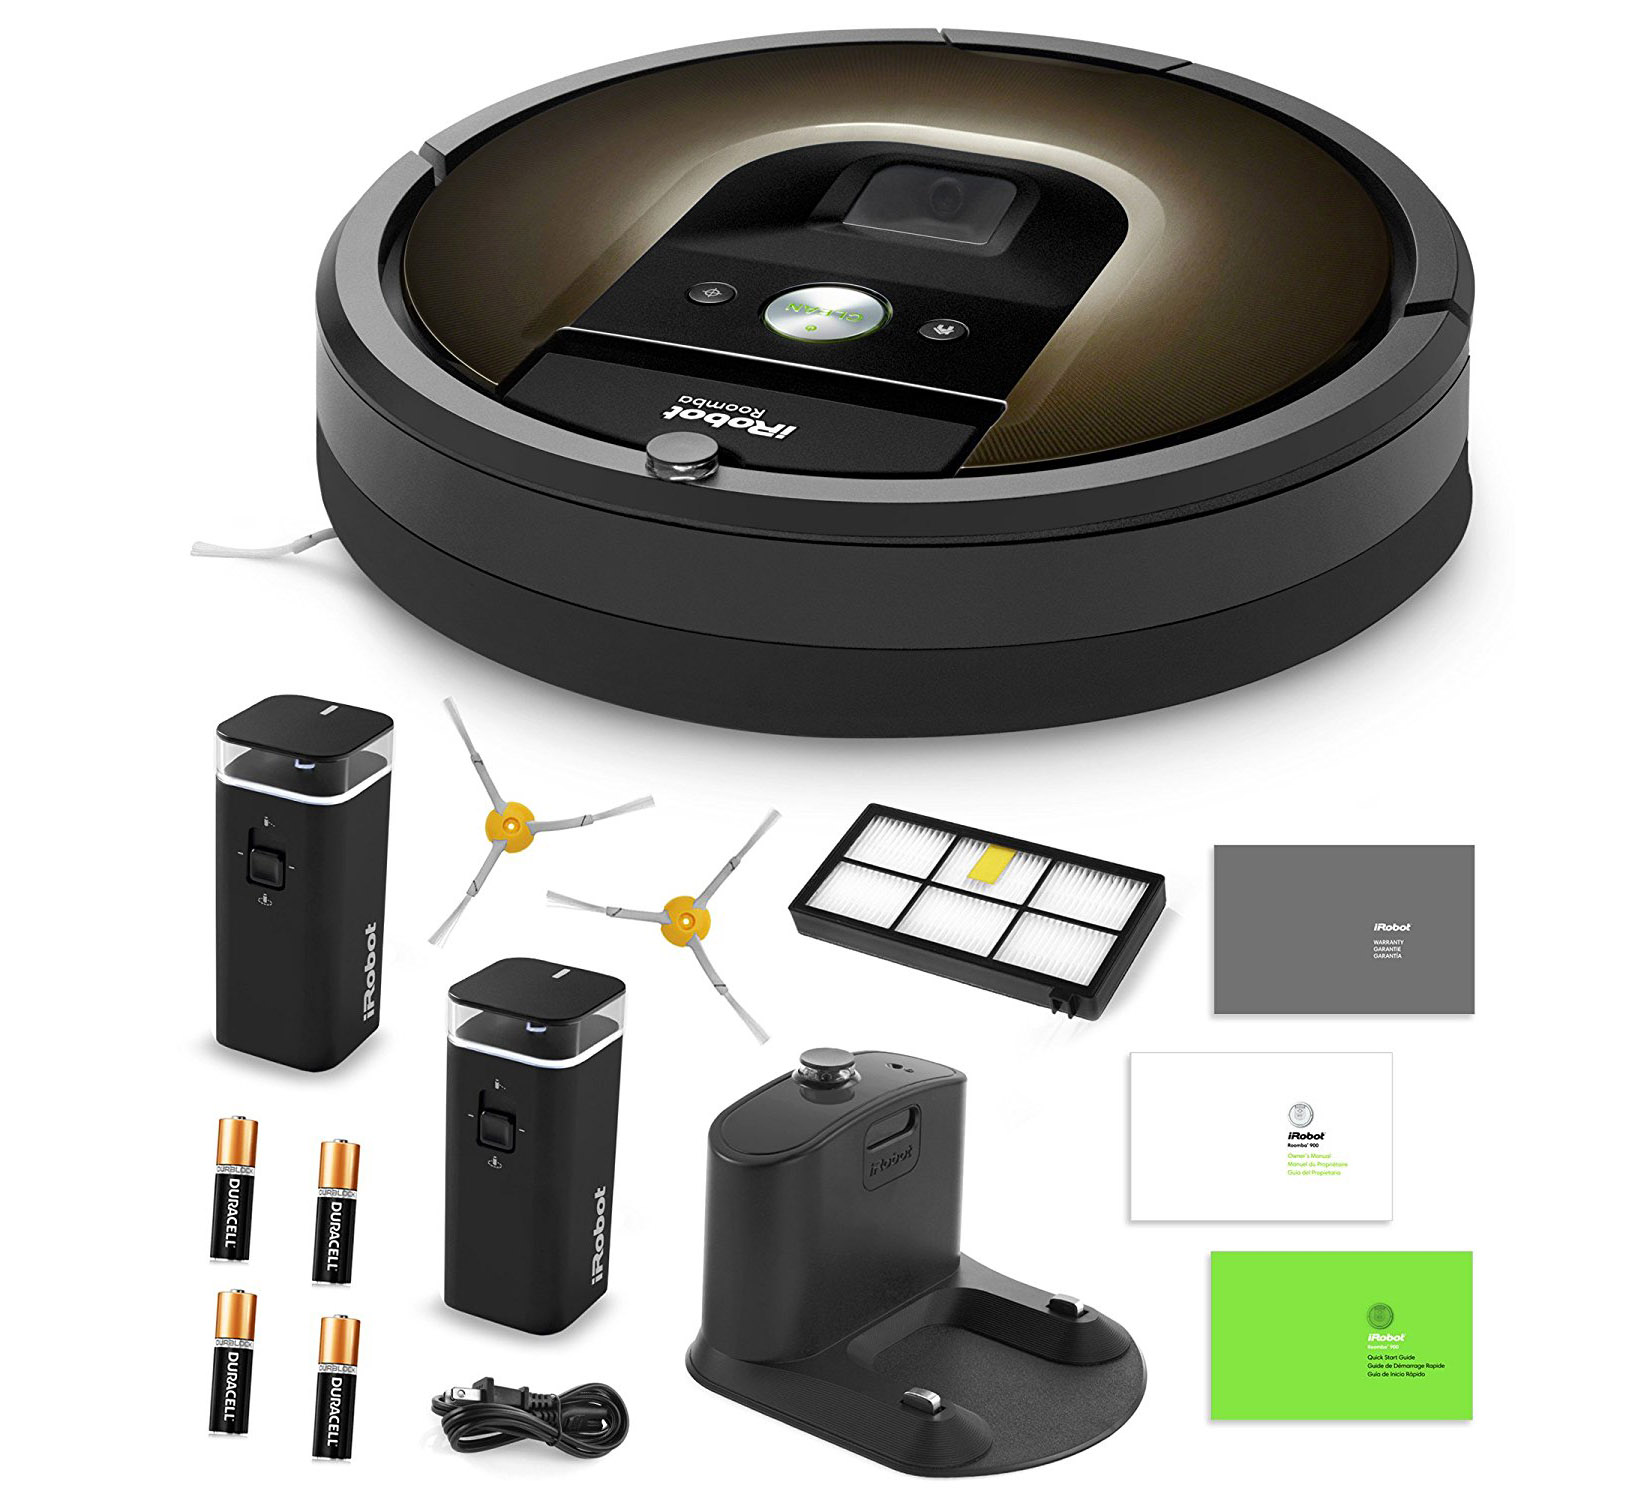 The 10 Best Robot Vacuums For Picking Up Pet Hair BroBible